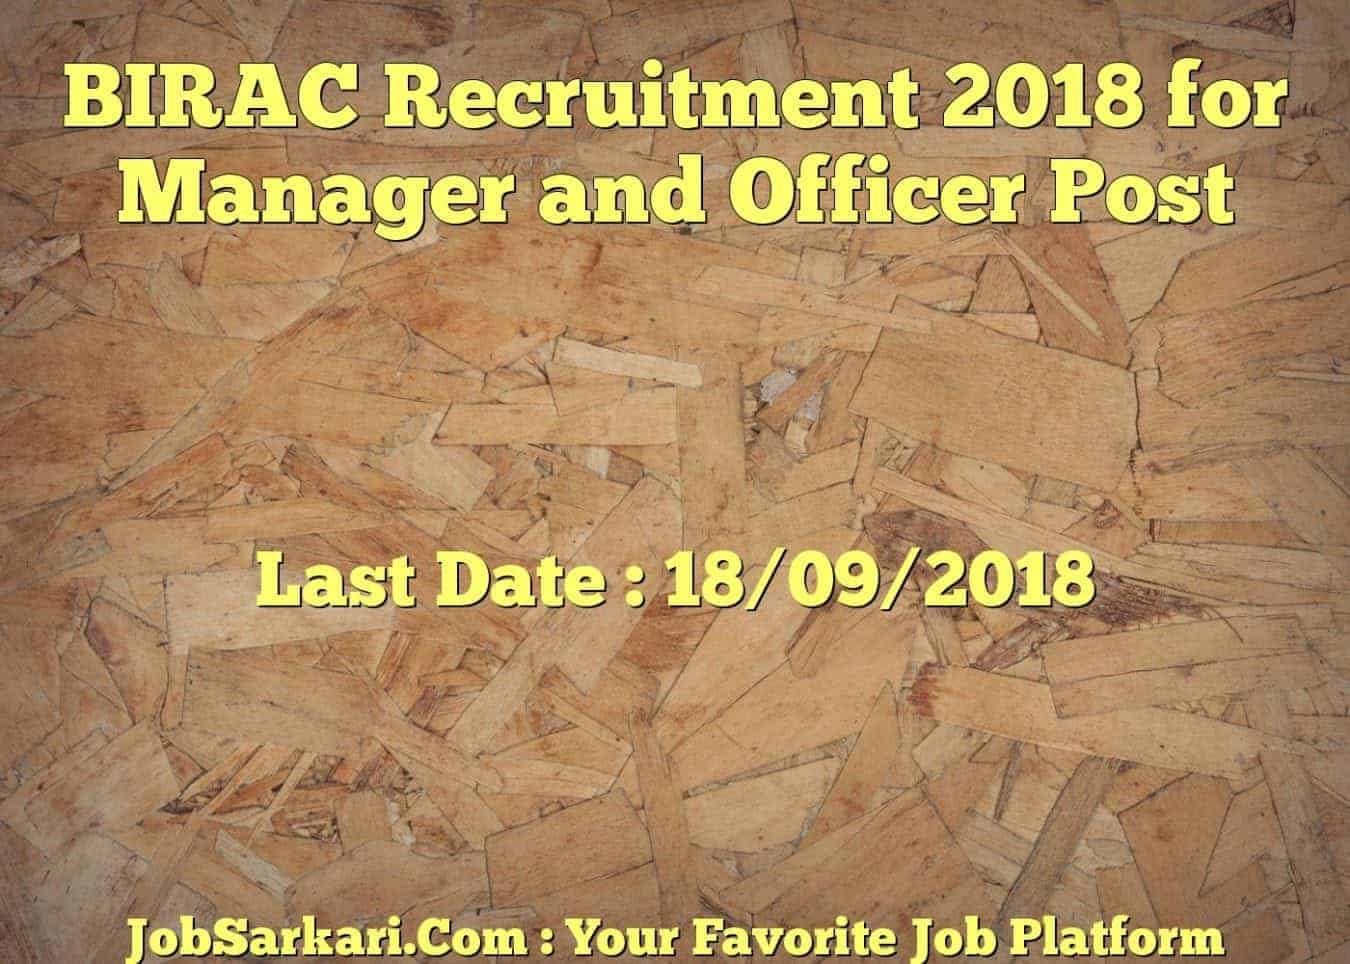 BIRAC Recruitment 2018 for Manager and Officer Post